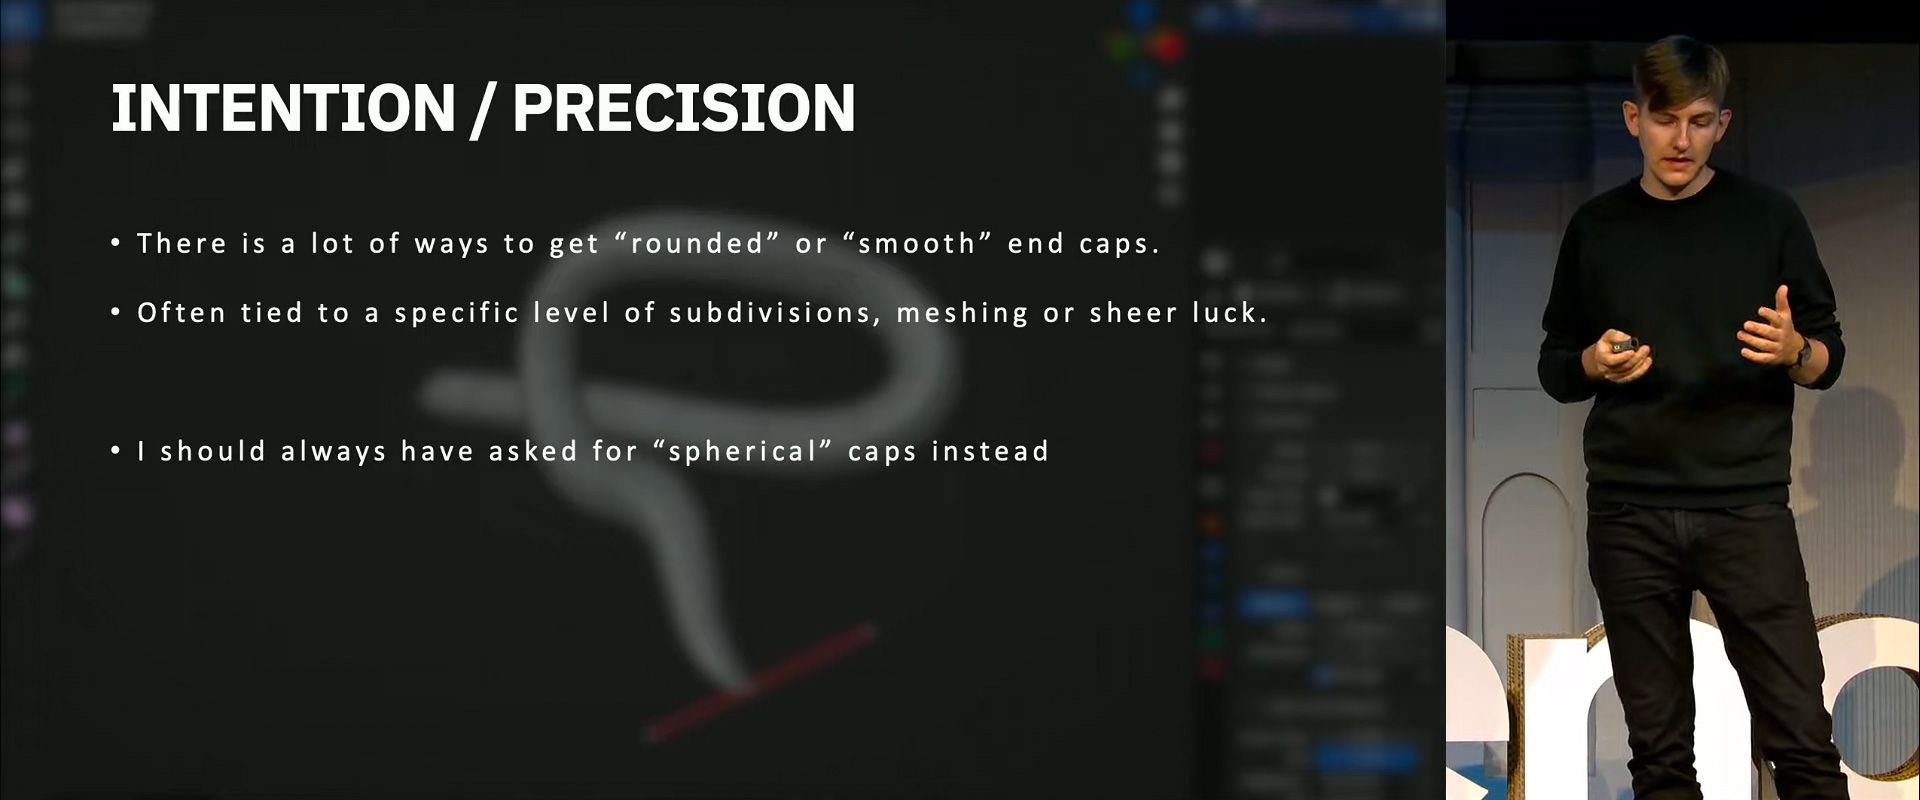 Screengrabs from the Blender Conference Stream